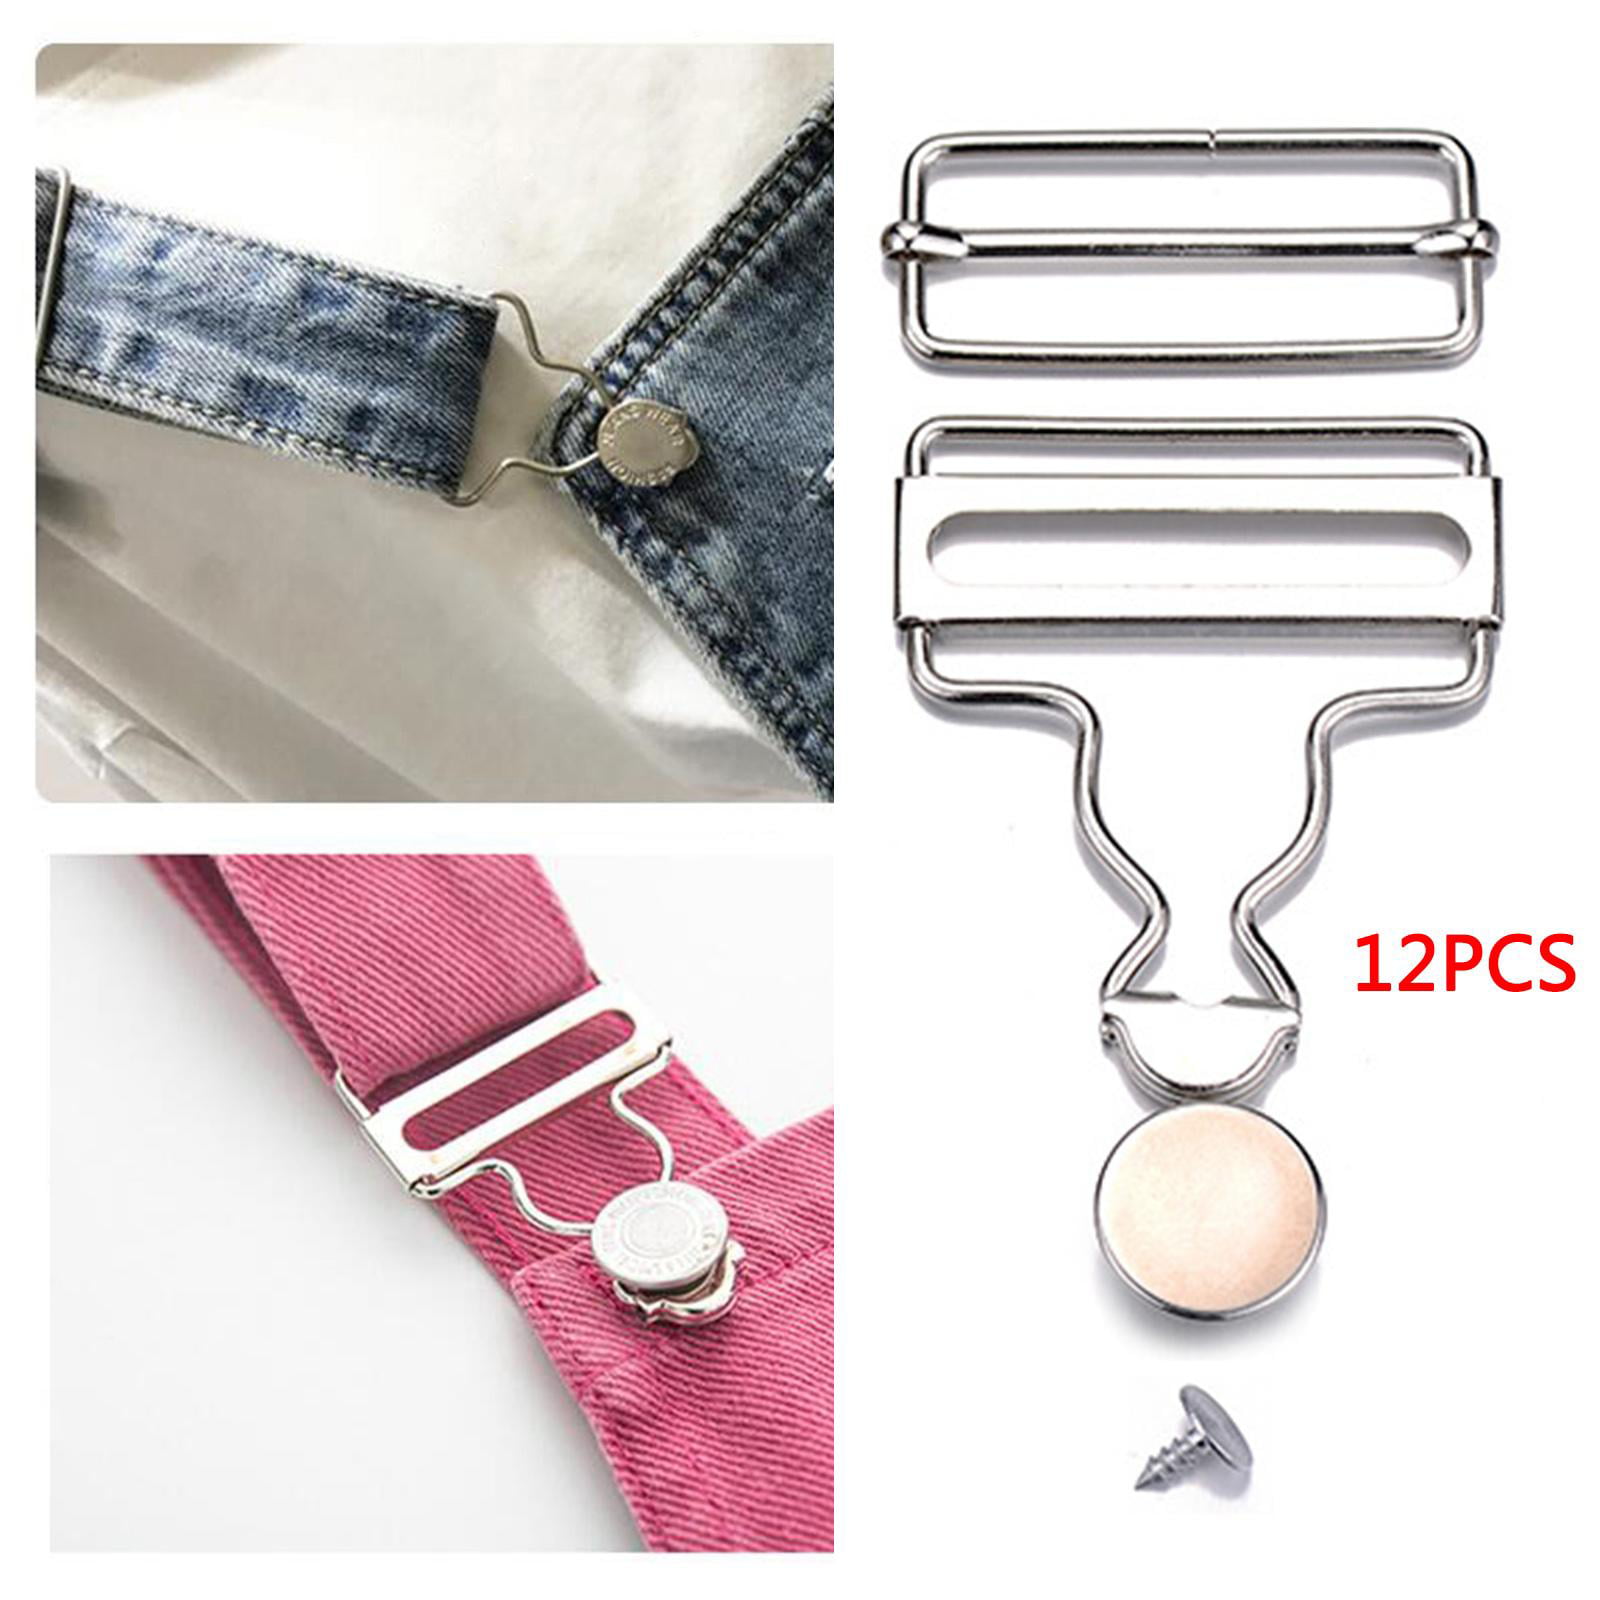 6 Sets Overall Buckles Metal Suspender Replacement Buckles with Rectangle Buckle Slider No-Sew Buttons Pants Jeans mm)